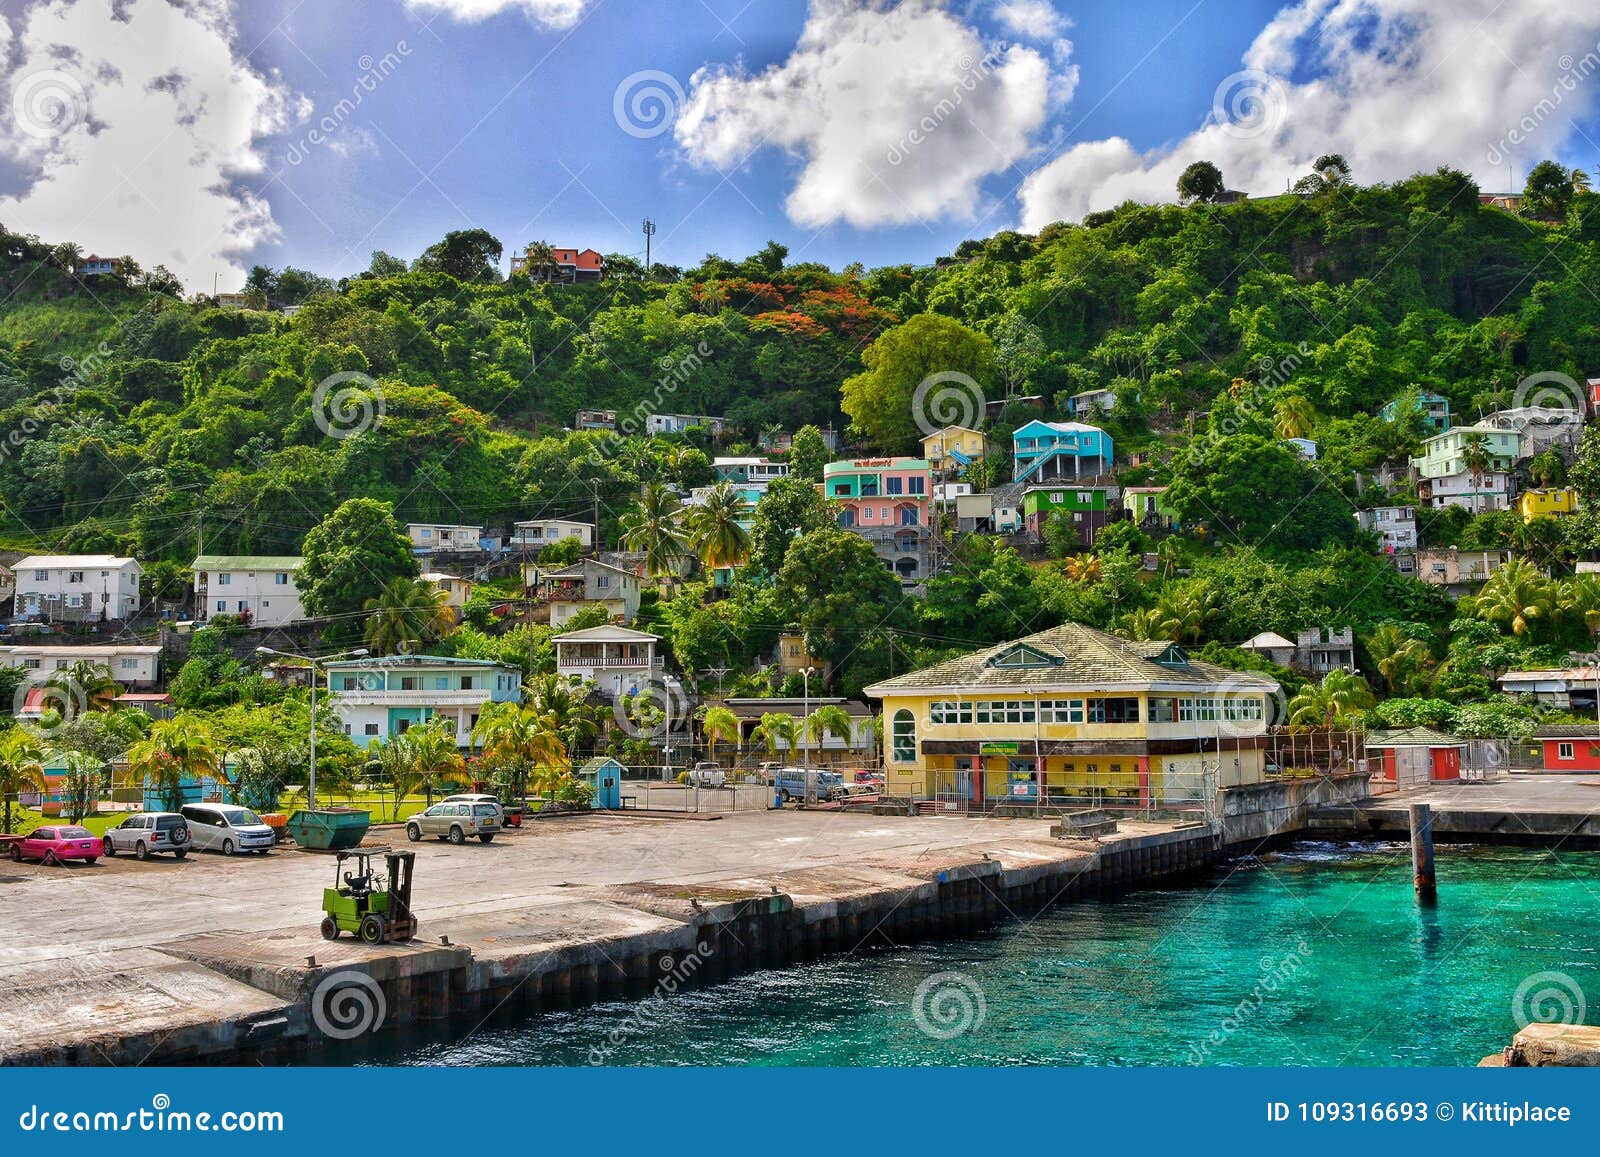 sea port of kingstown saint vincent and the grenadines